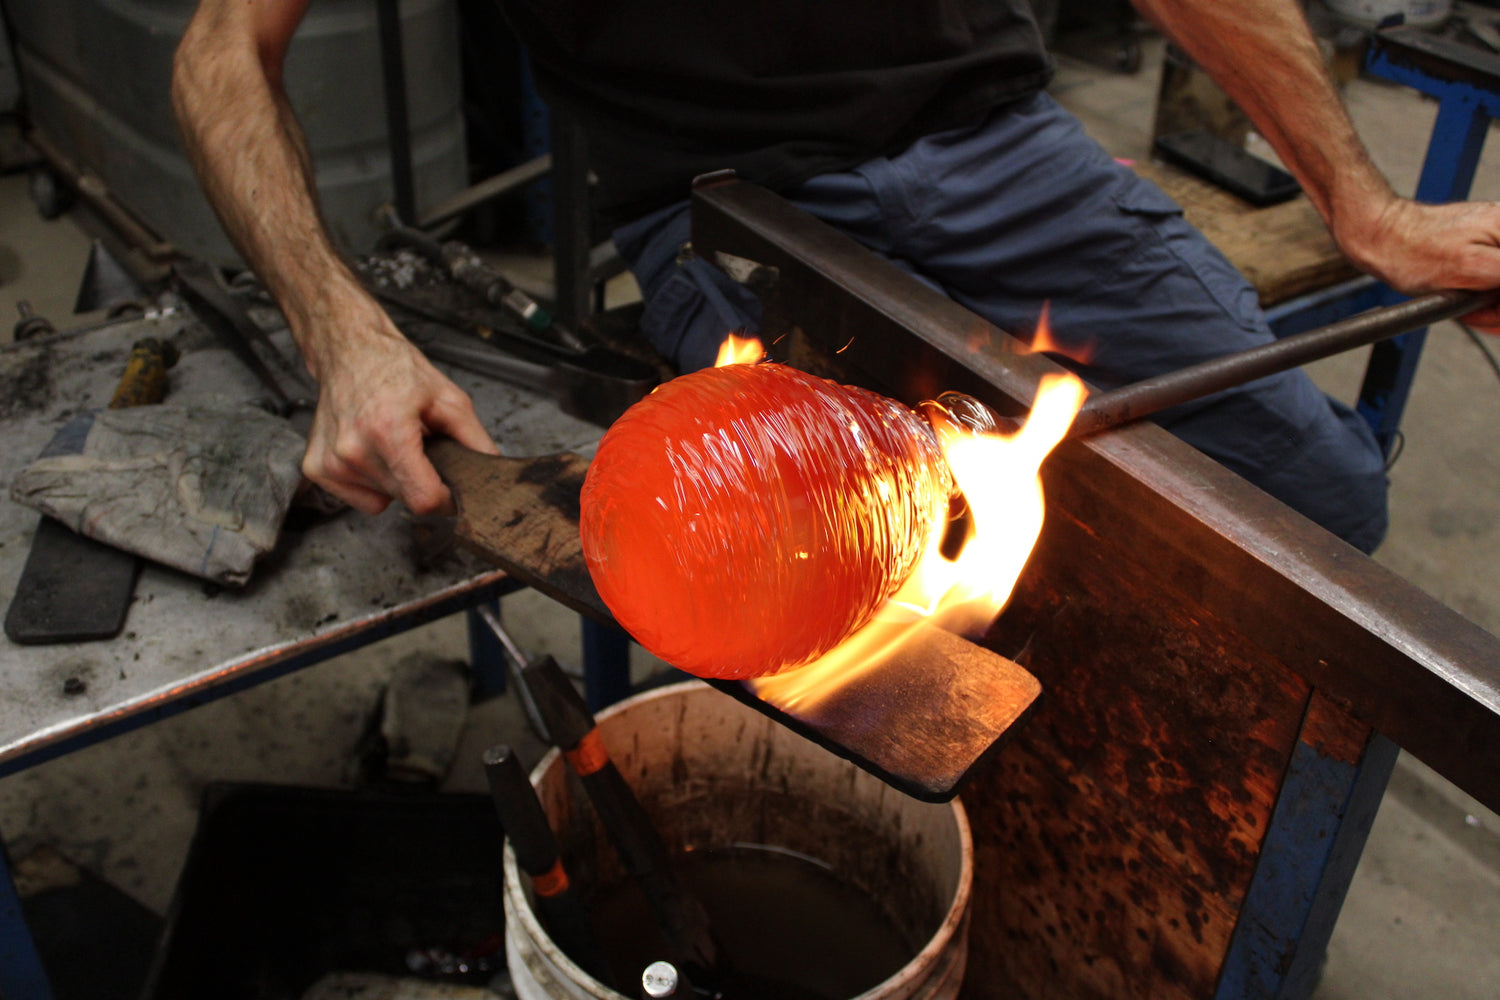 A spherical glass blown object is shaped and has flames exploding off of it